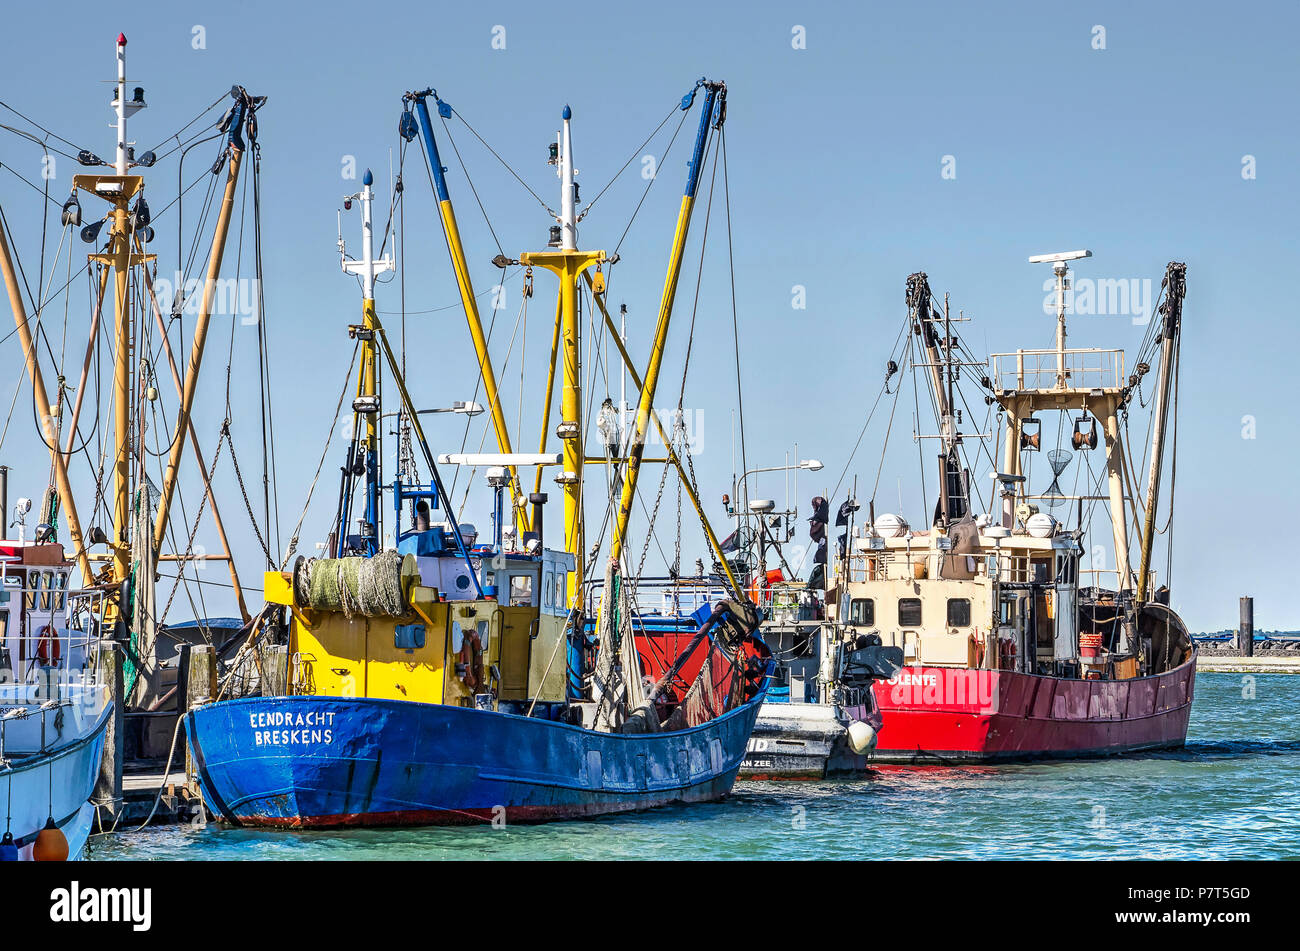 Breskens, The Netherlands, July 2nd, 2018: Several fishing boats in the harbour on a sunny summer evening Stock Photo